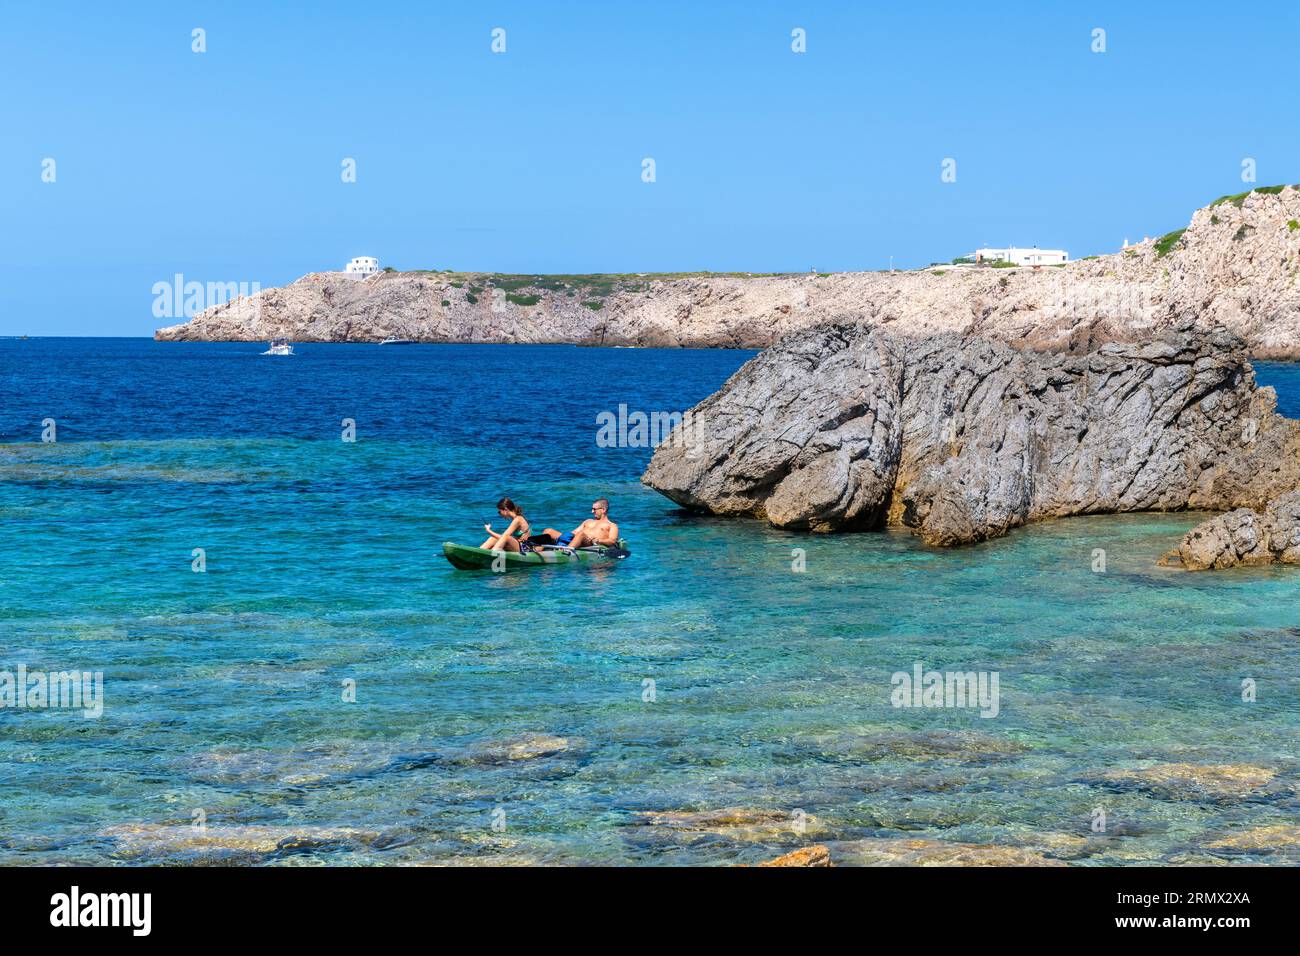 A young couple in a kayak Arenal D'en castell Menorca Spain. Stock Photo